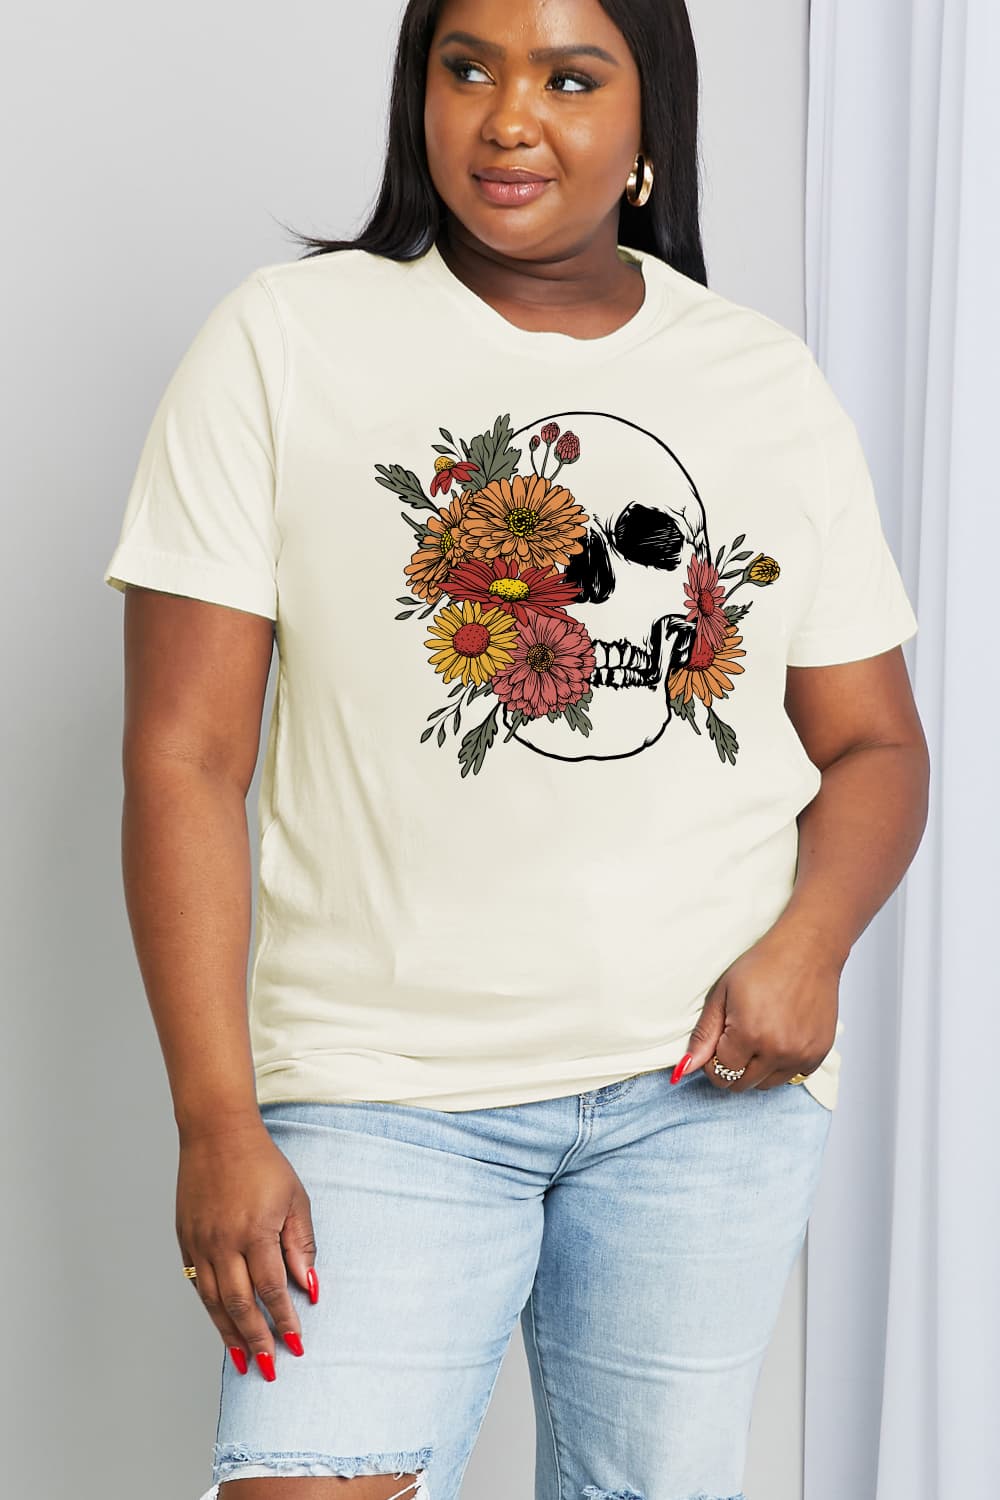 Simply Love Graphic T-shirts Ivory / S Full Size Flower Skull Graphic Cotton Tee